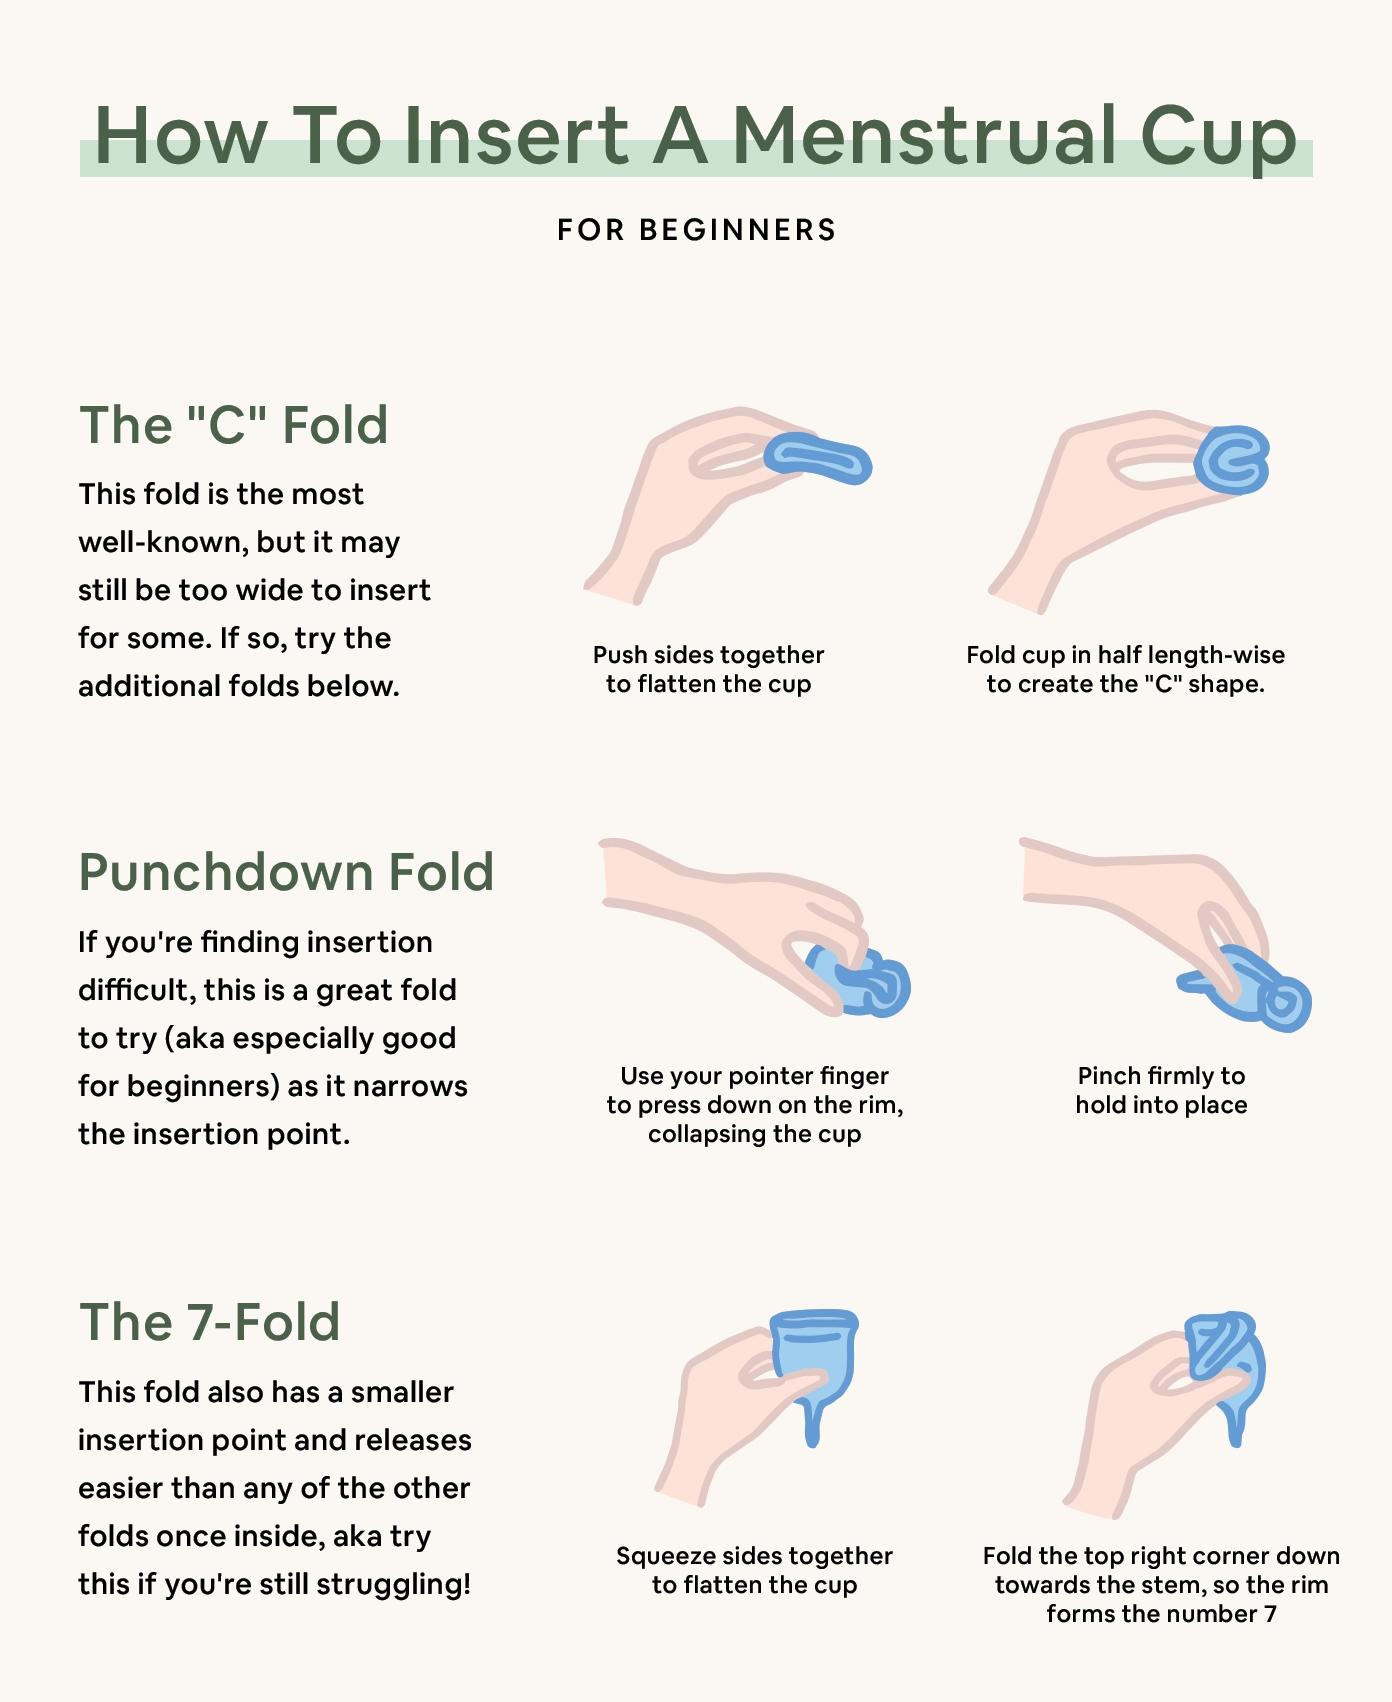 how to insert a menstrual cup for beginners